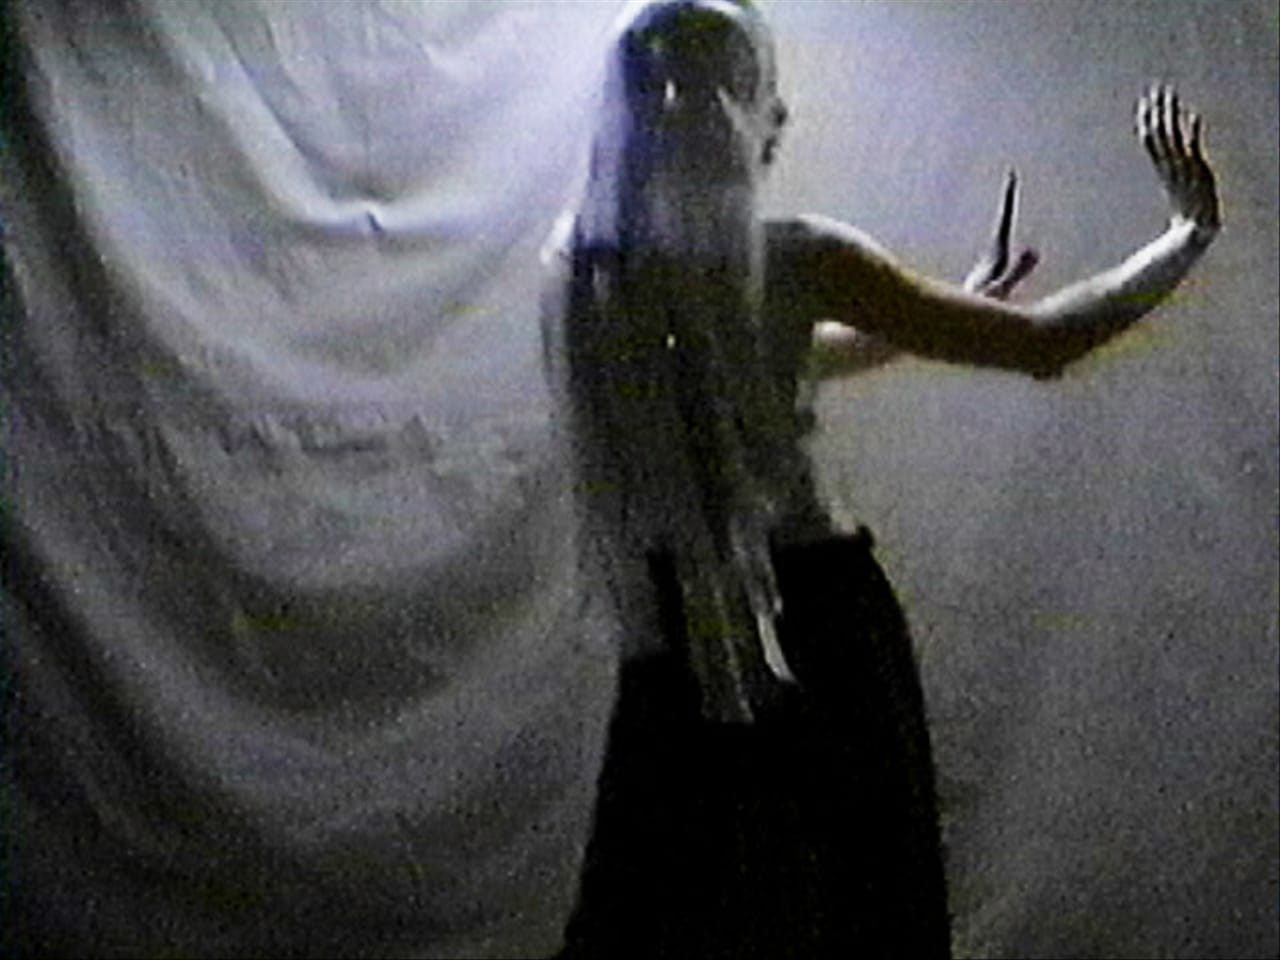 Performer standing, veiled, from behind. She gestures with her arms